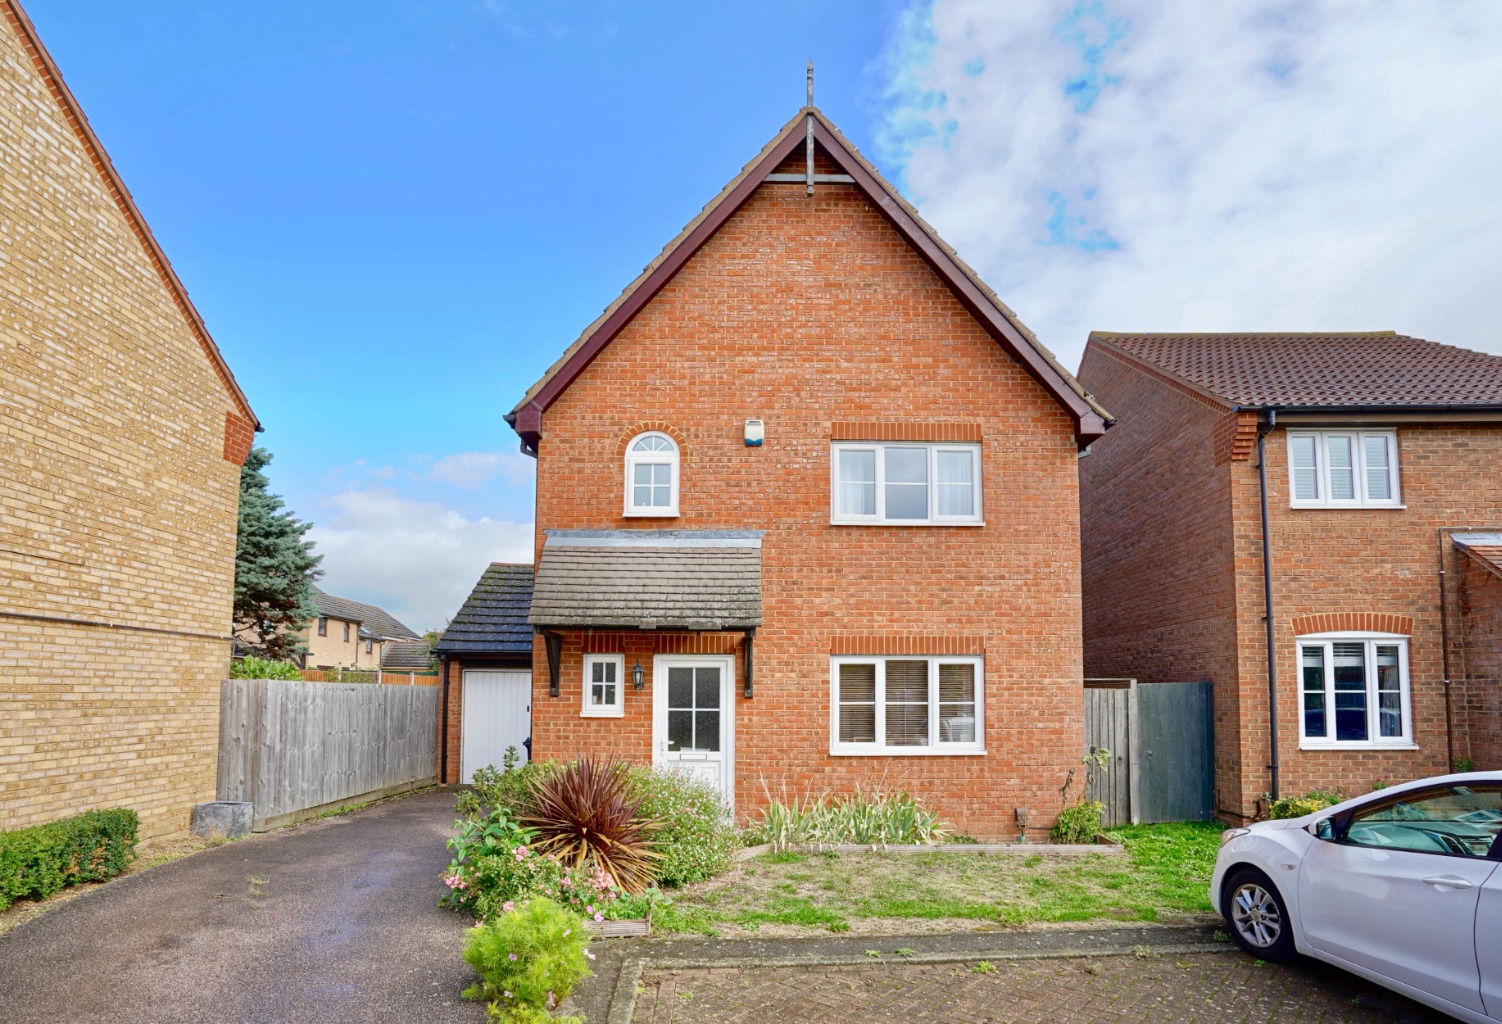 3 bed detached house for sale in Hawk Drive, Huntingdon  - Property Image 1